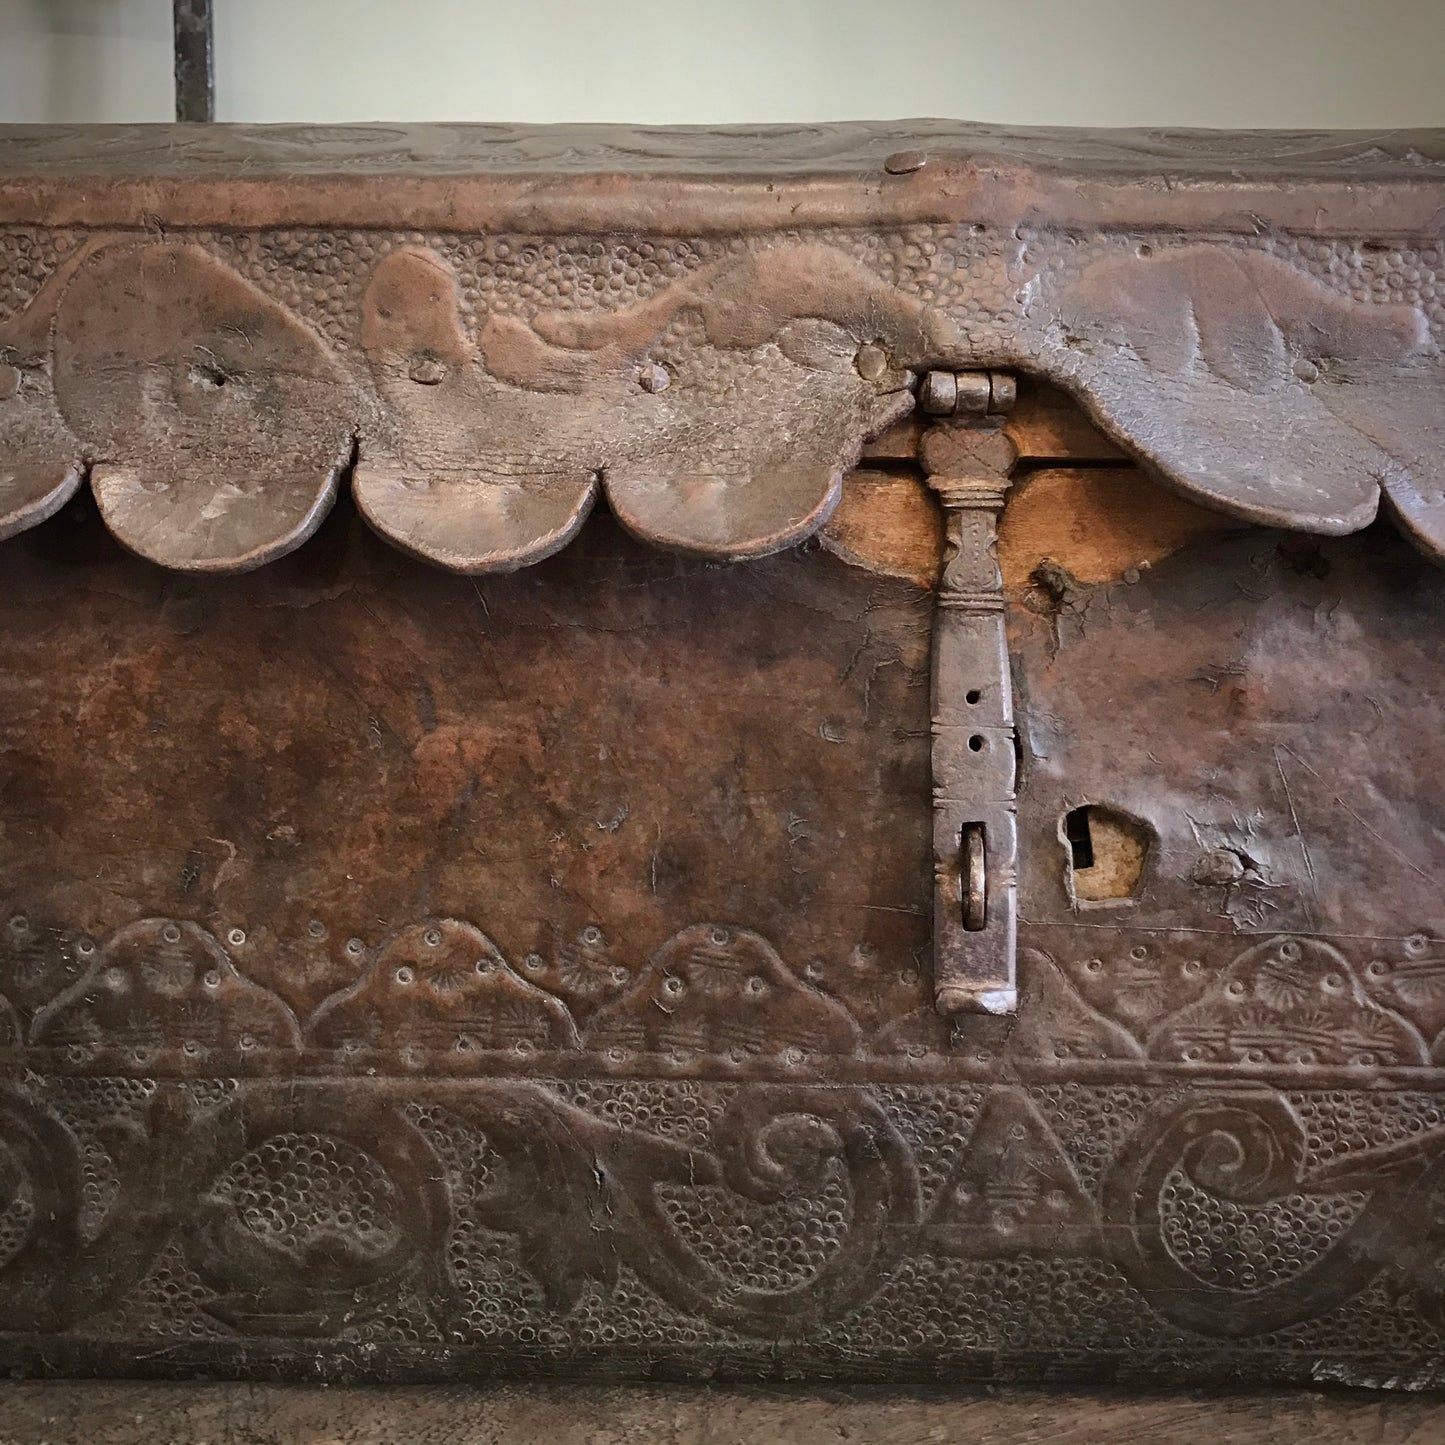 Spanish Colonial Chest c.1600-1650